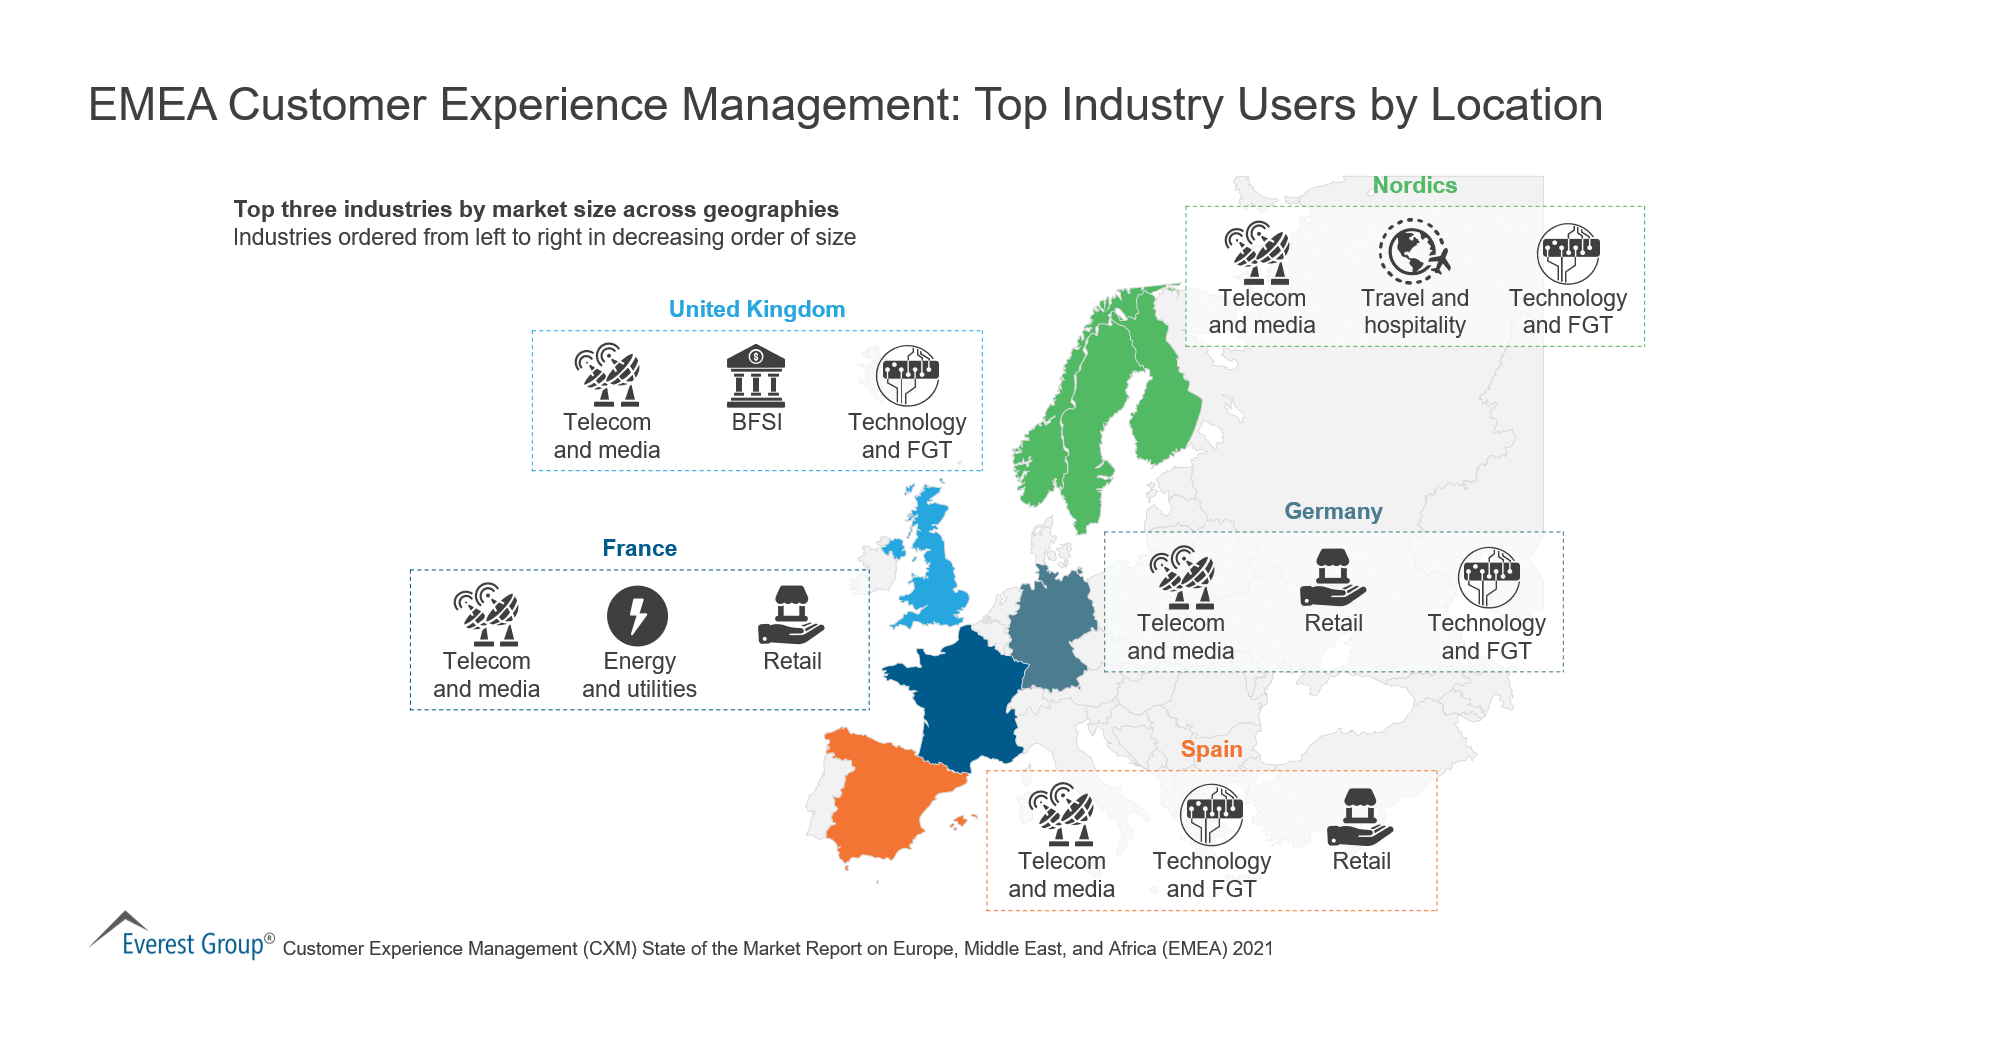 EMEA Customer Experience Management - Top Industry Users by Location